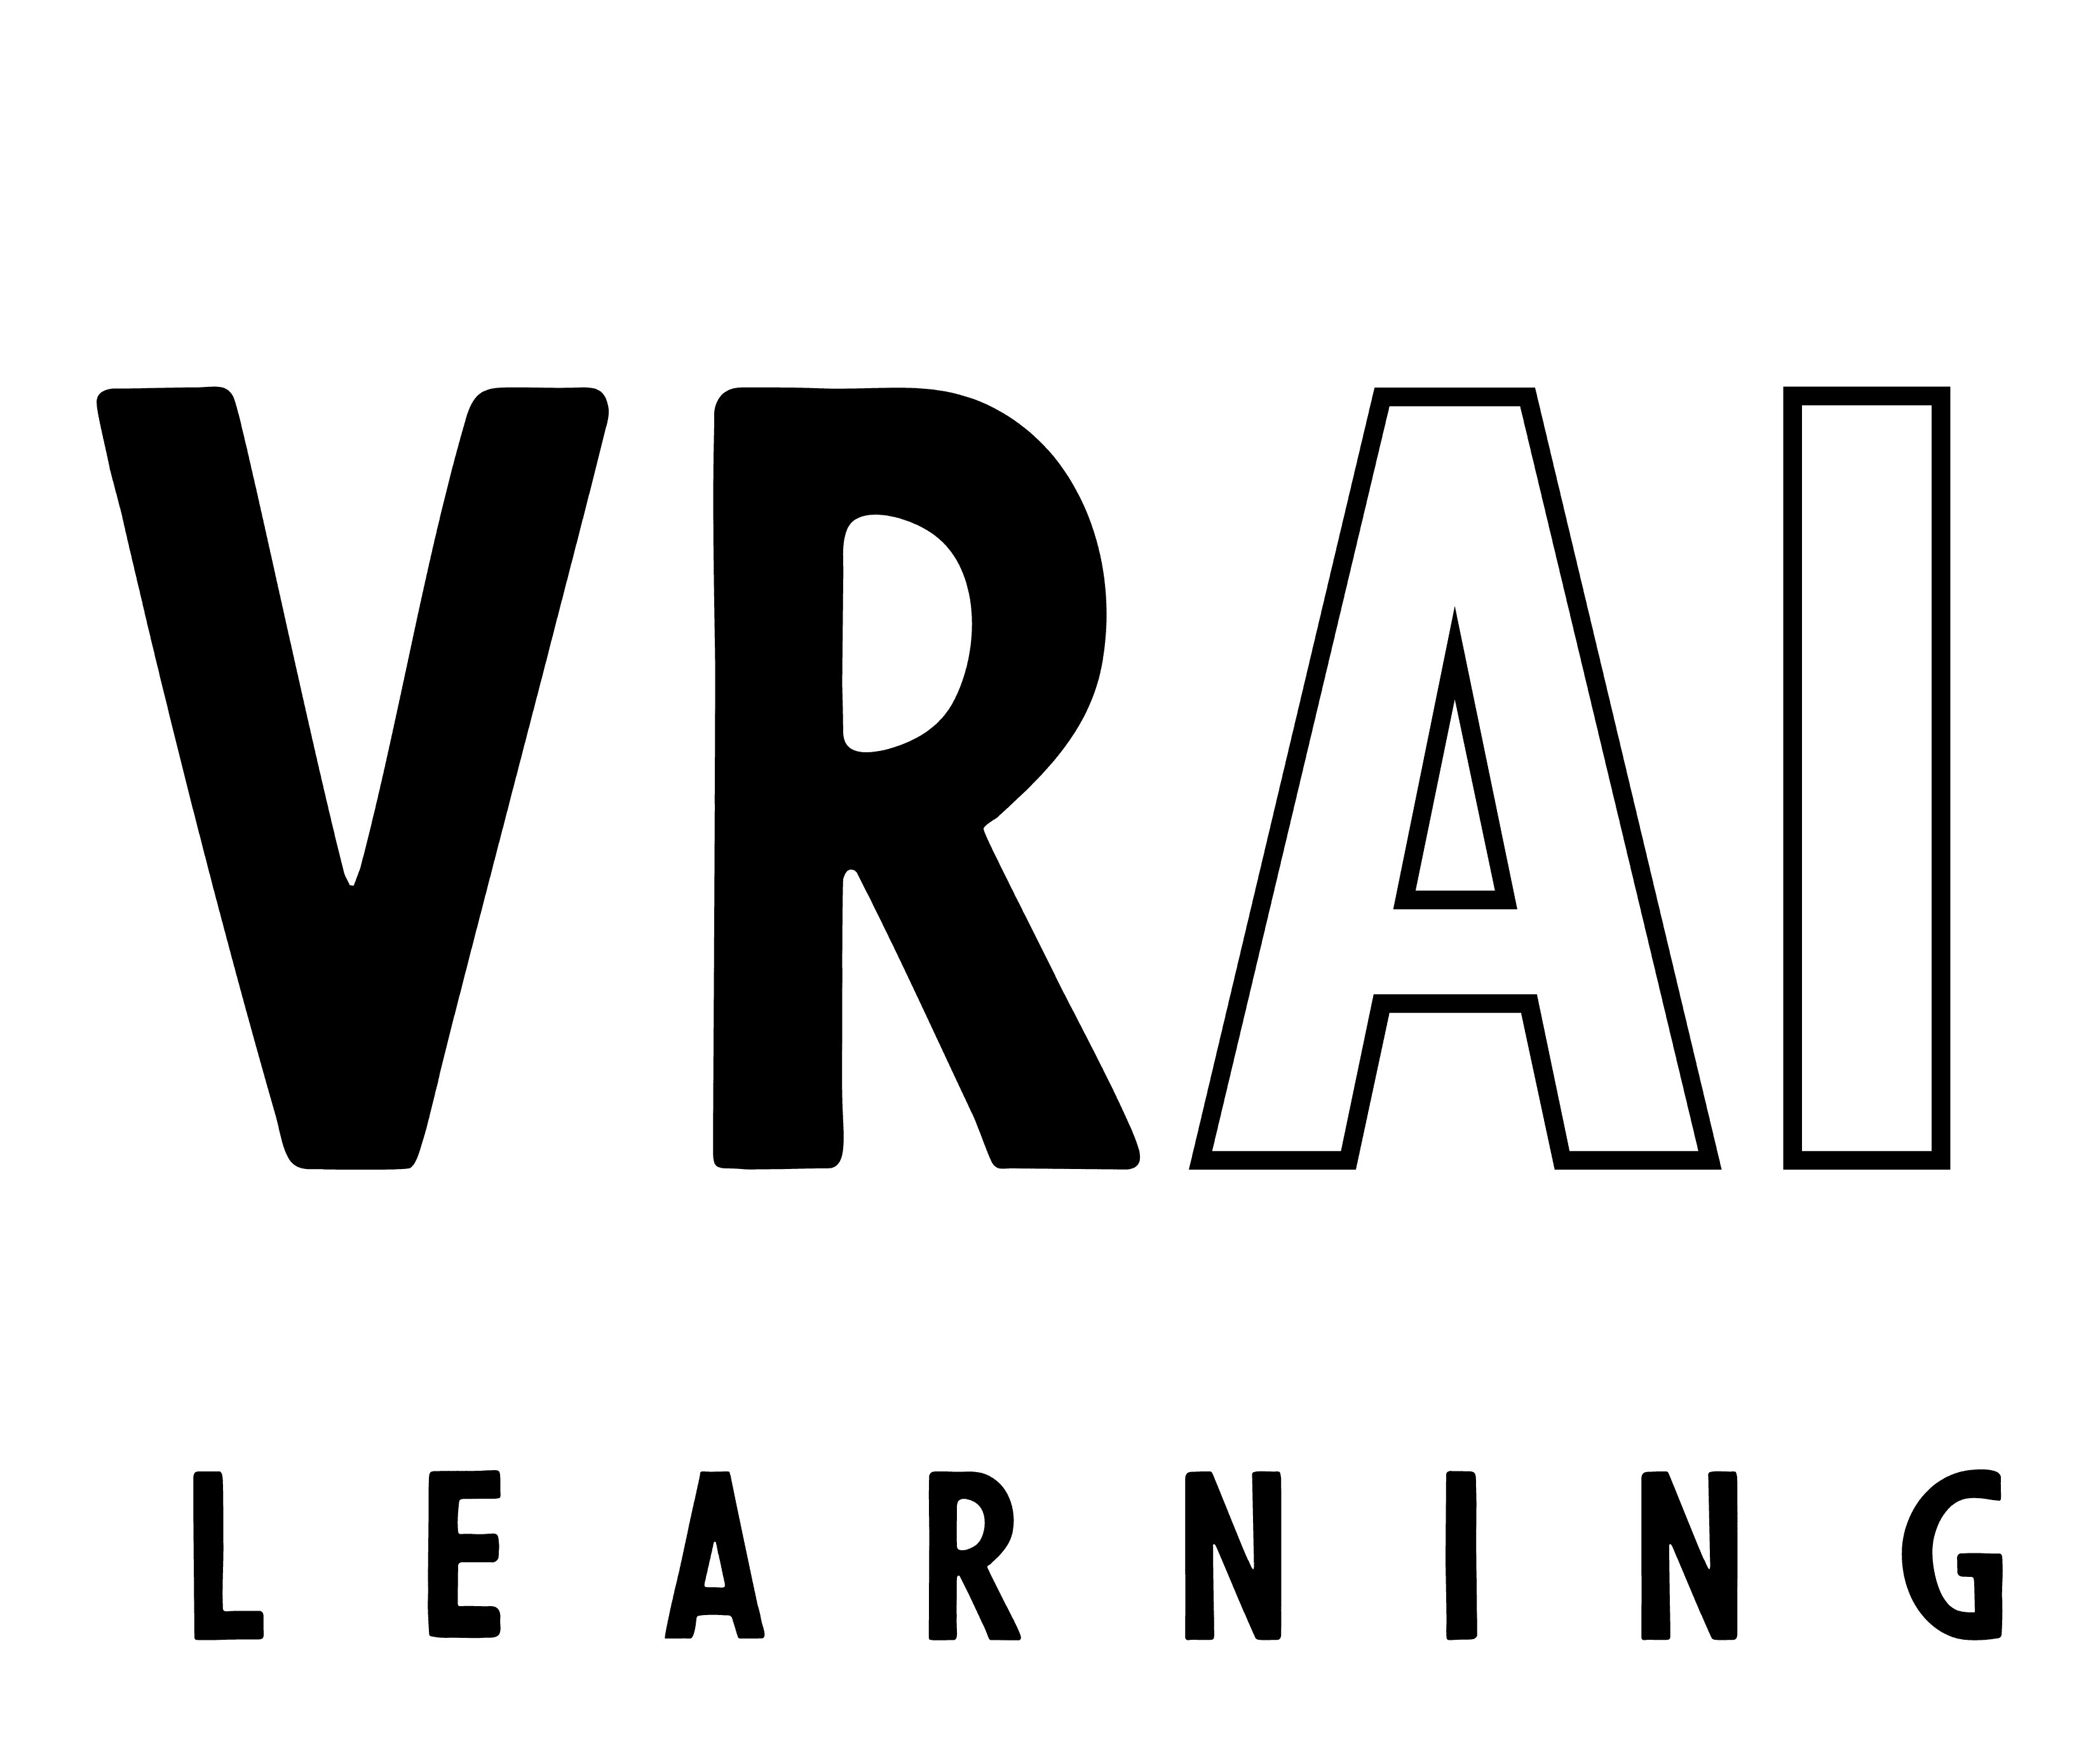 VRAI LEARNING